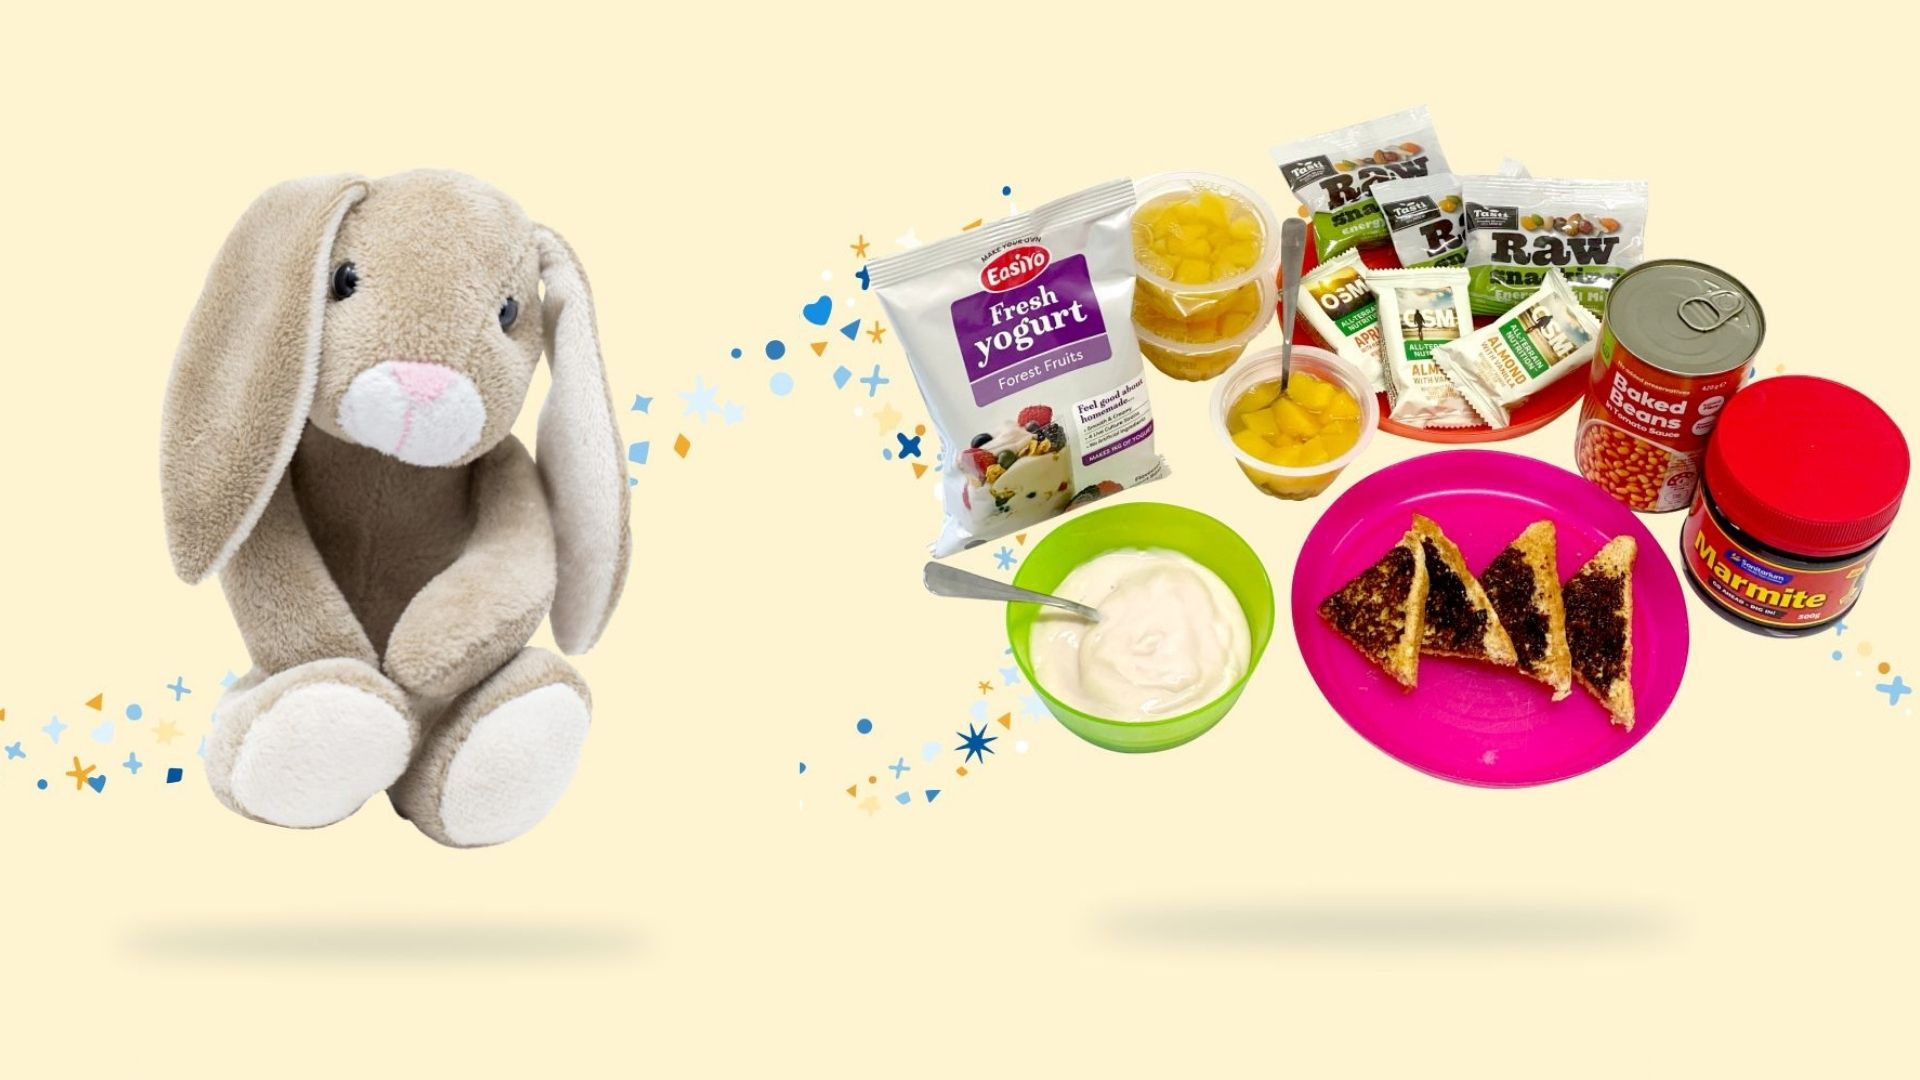 On the left is a toy bunny and on the right is a collection of breakfast food items, a cream background with swirls of illustrated stars is behind both images.